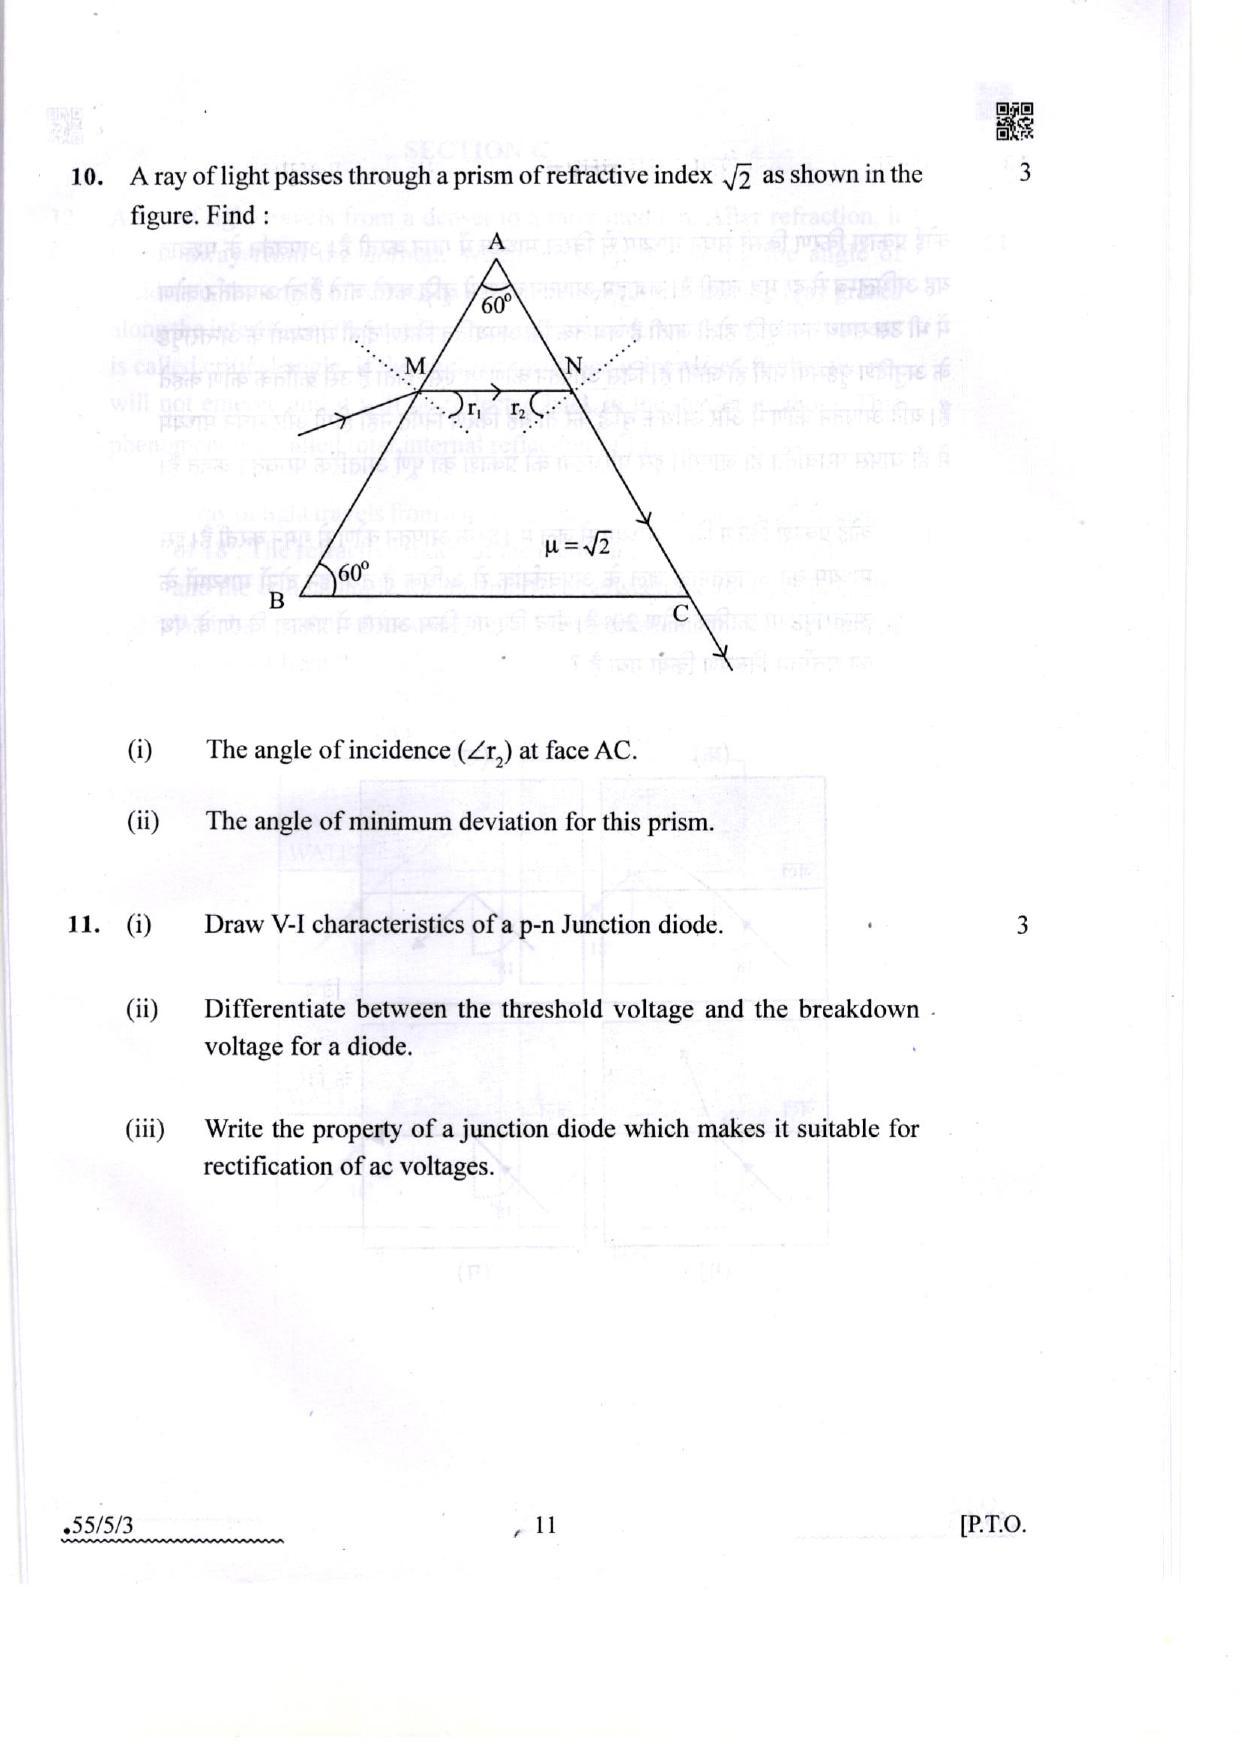 CBSE Class 12 55-5-3 Physics 2022 Question Paper - Page 11